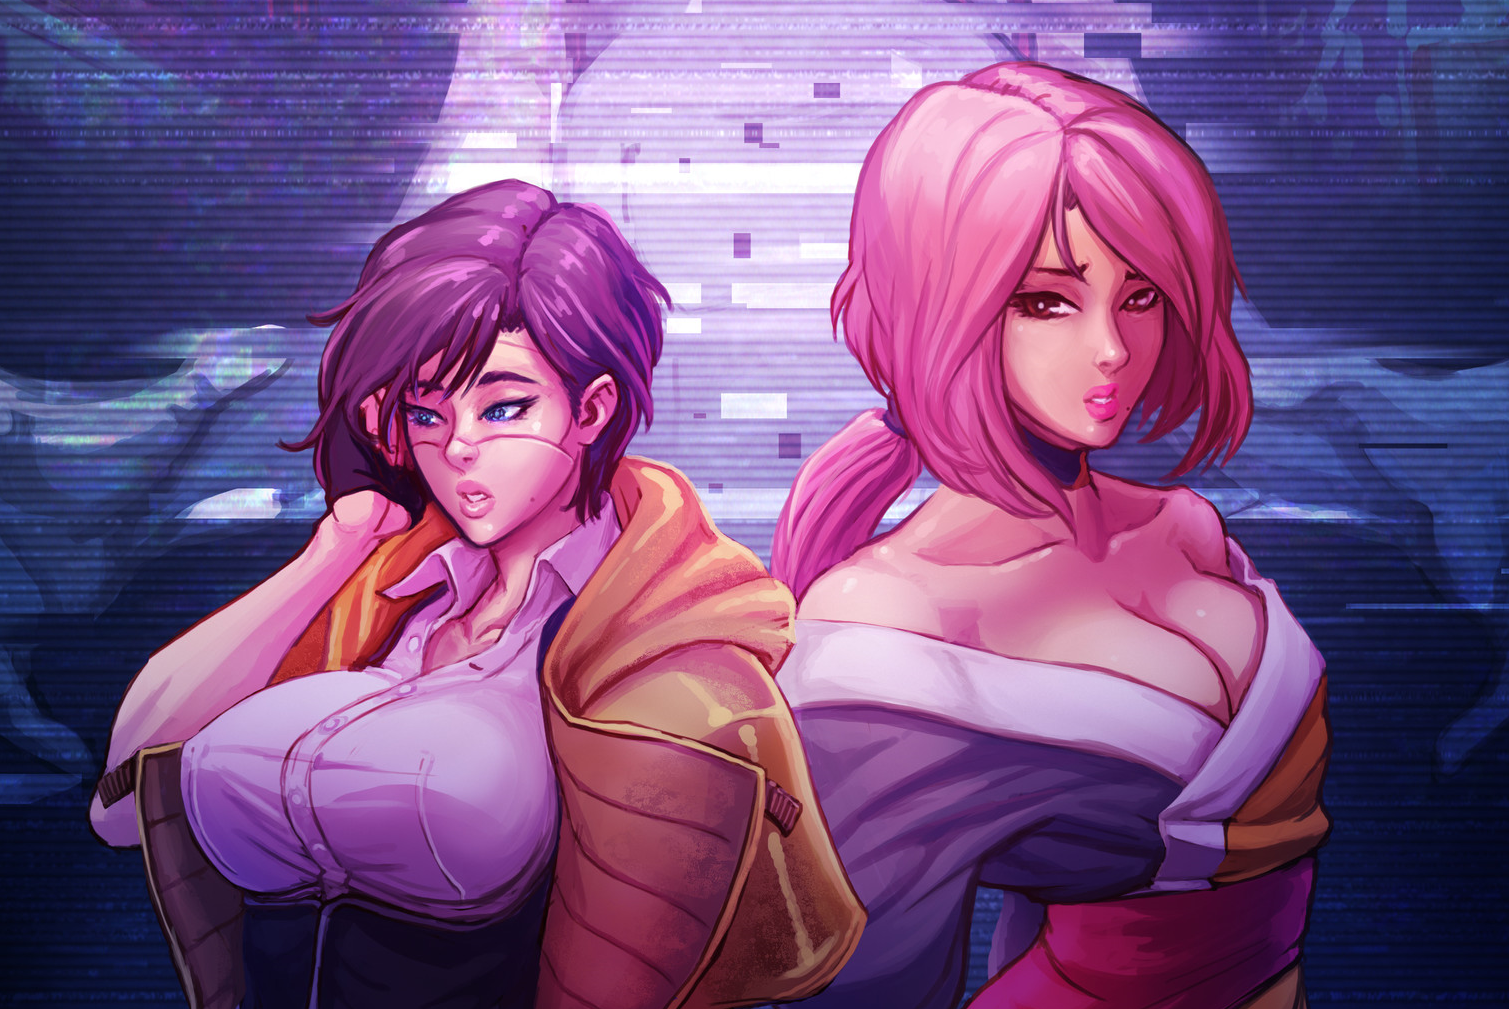 Sense: A Cyberpunk Ghost Story developer categorically refuses to censor the game following backlash and death threats